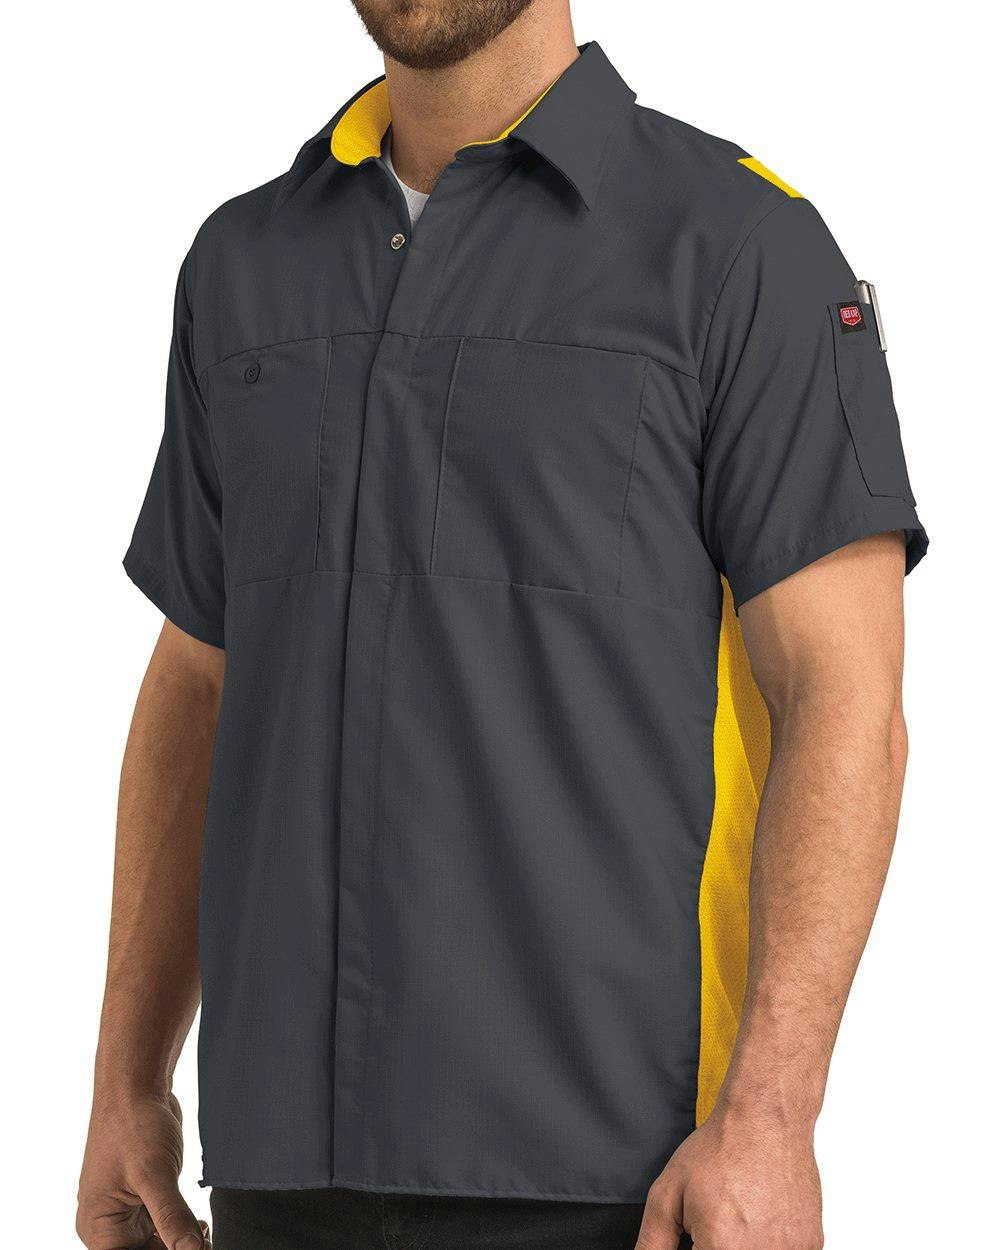 Image for Performance Plus Short Sleeve Shirt with Oilblok Technology - SY42